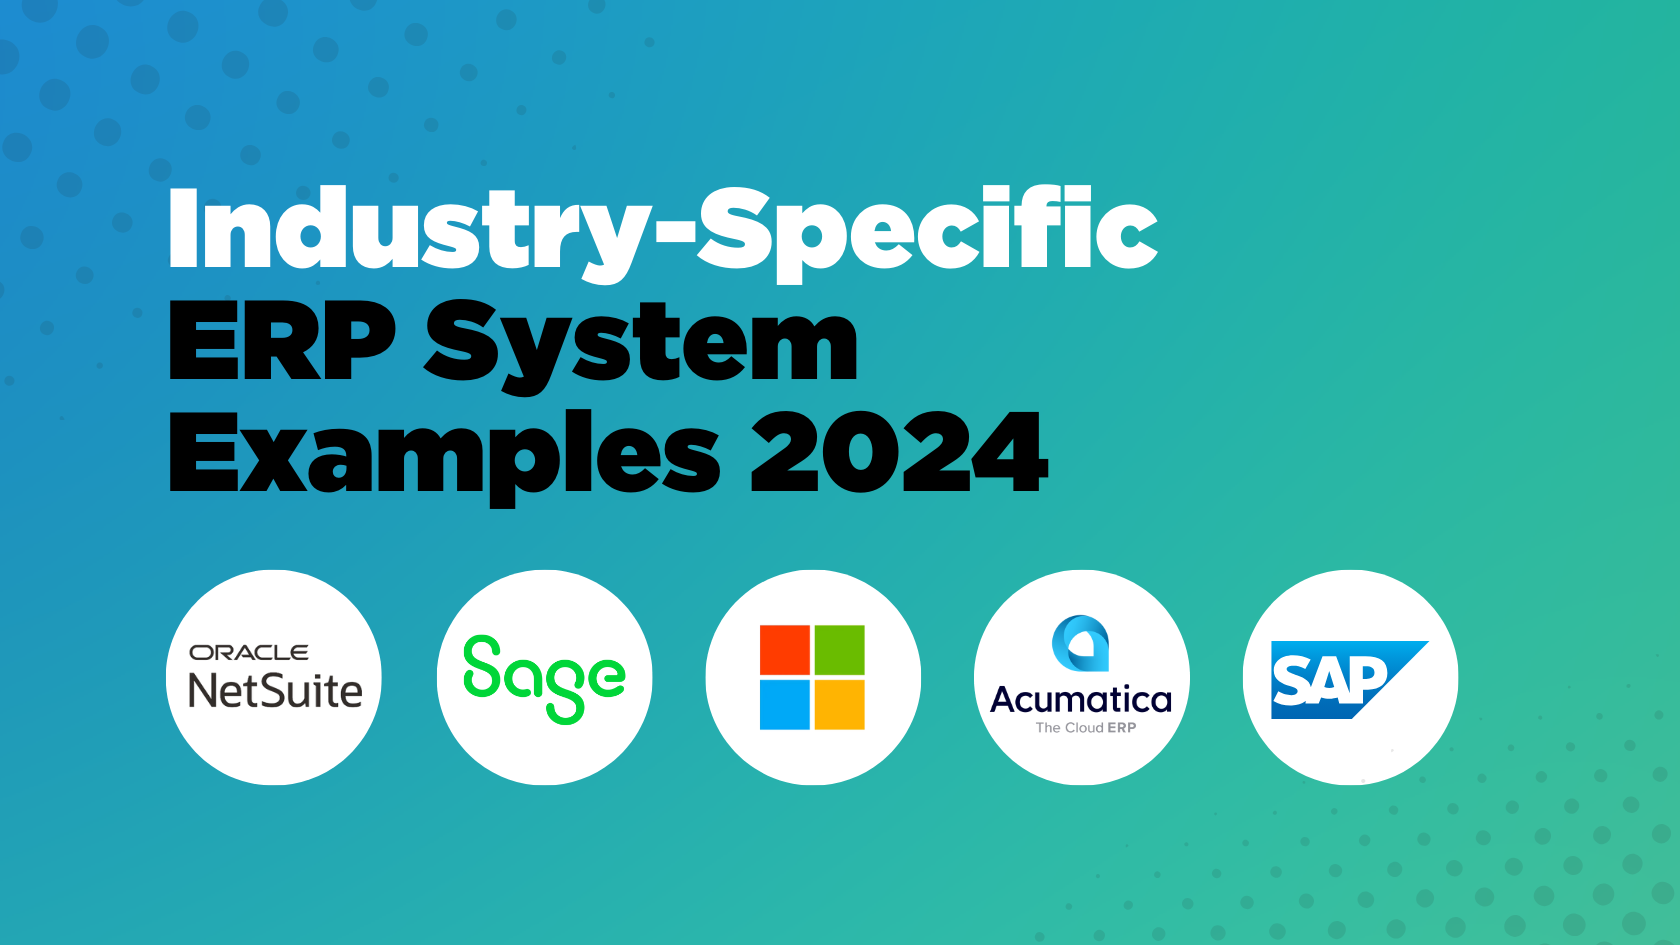 Industry-specific ERP System Examples 2024